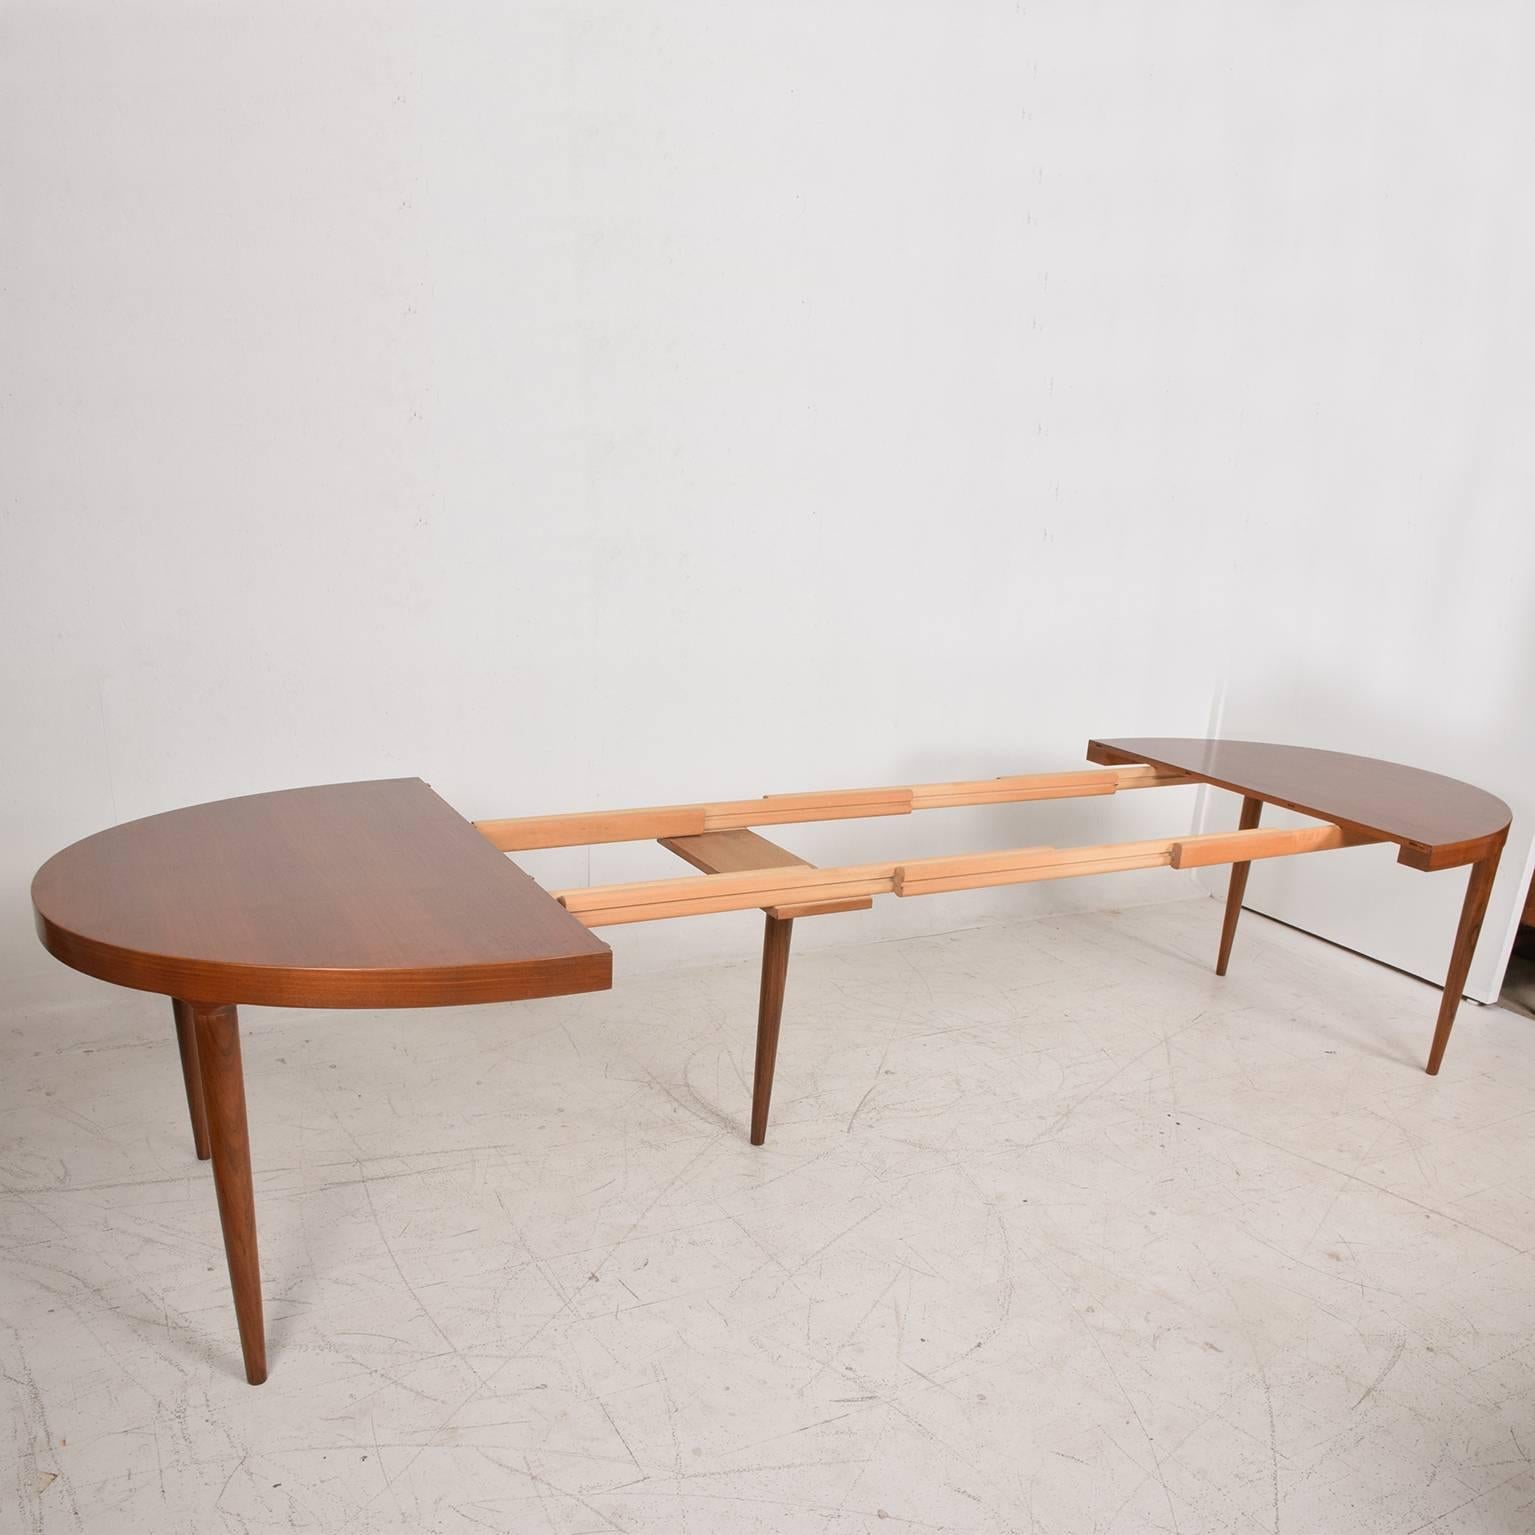 Midcentury Danish Modern Teak Dining Table in Excellent Condition 4